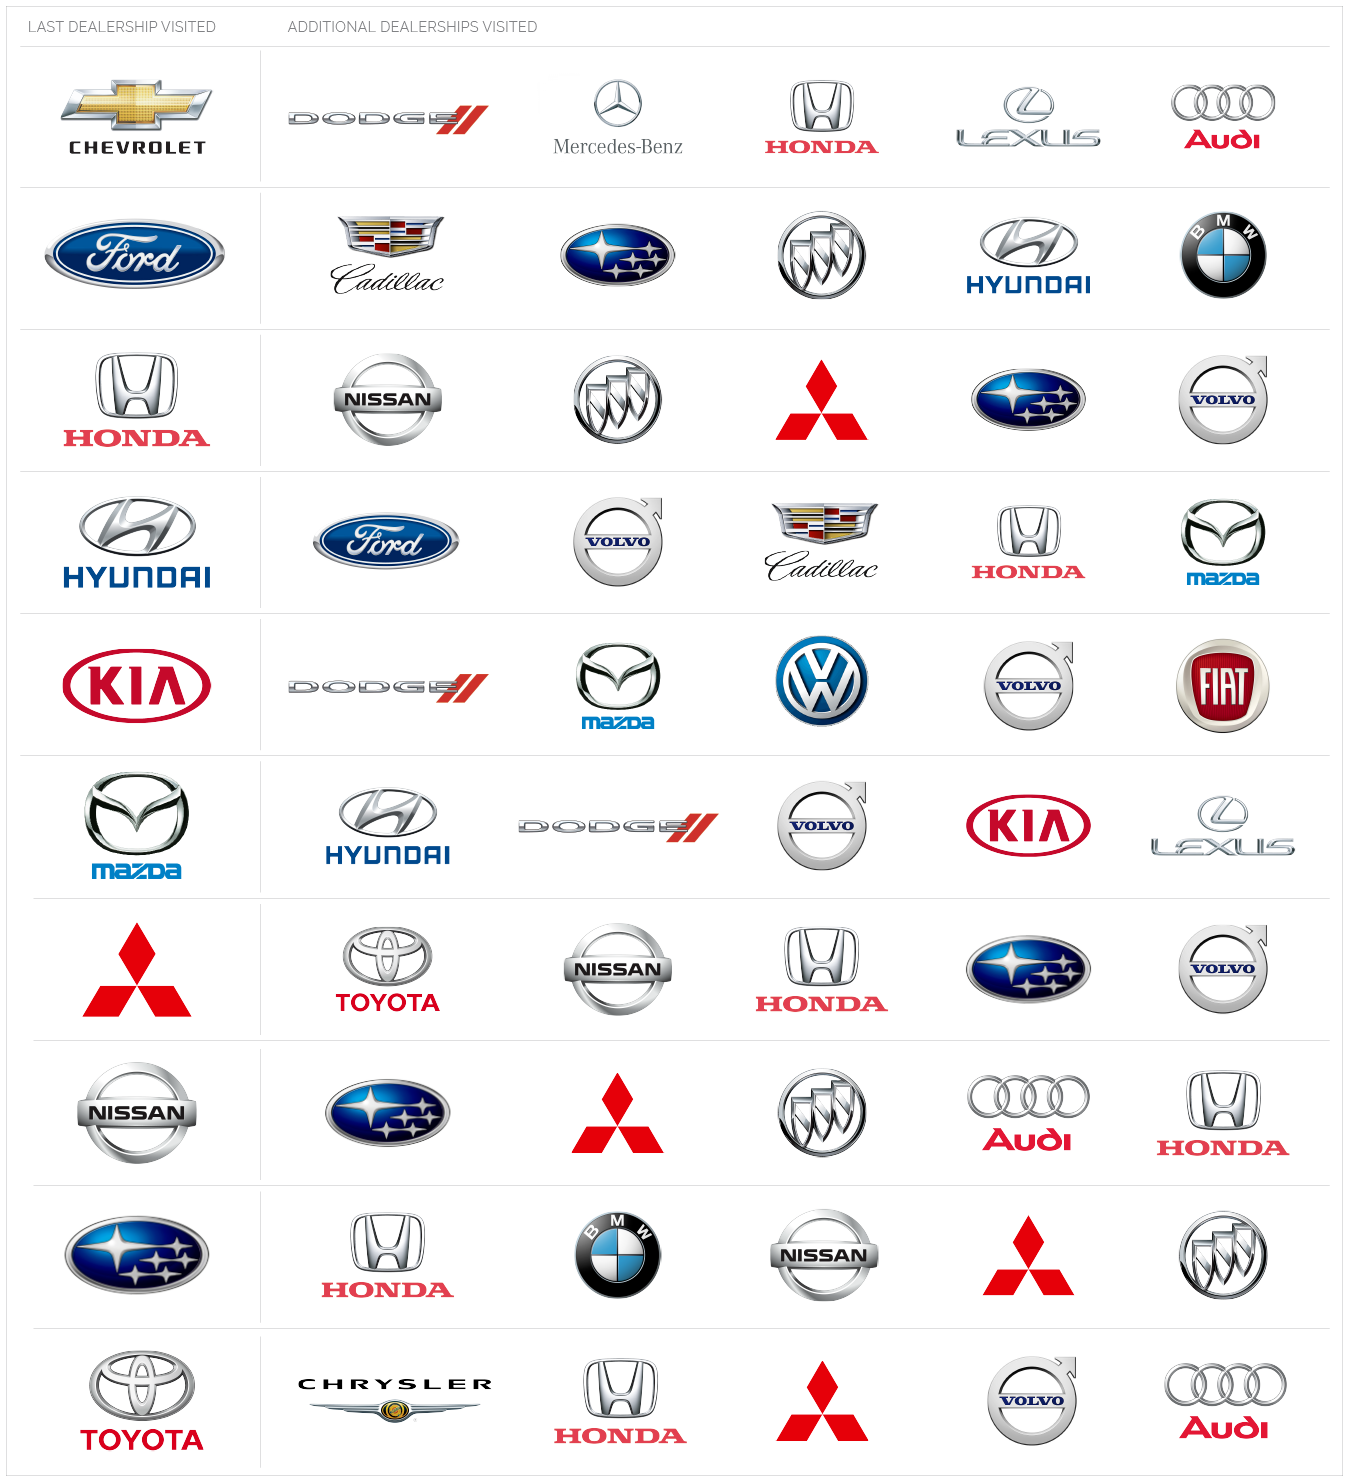 Automakers: Who Is Your Real Competition? - Gravy Analytics